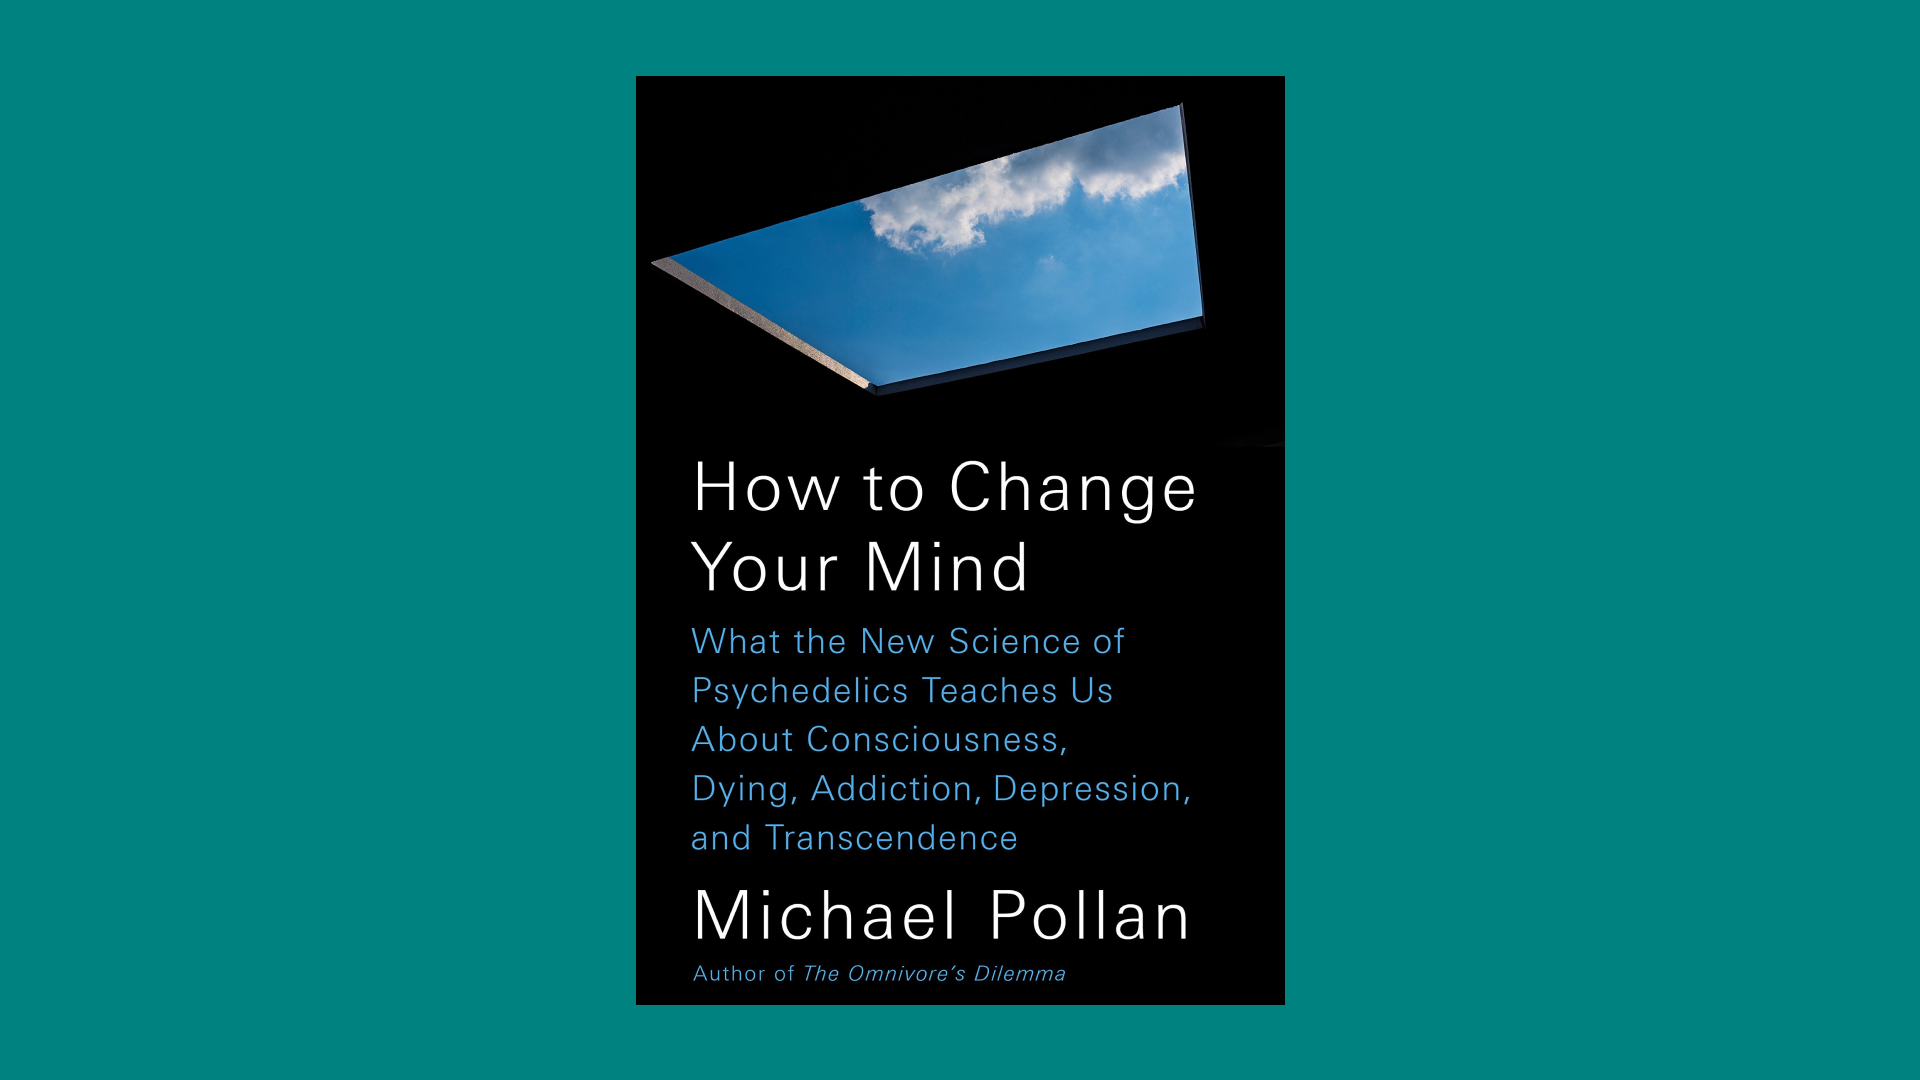 "How to Change Your Mind" by Michael Pollan